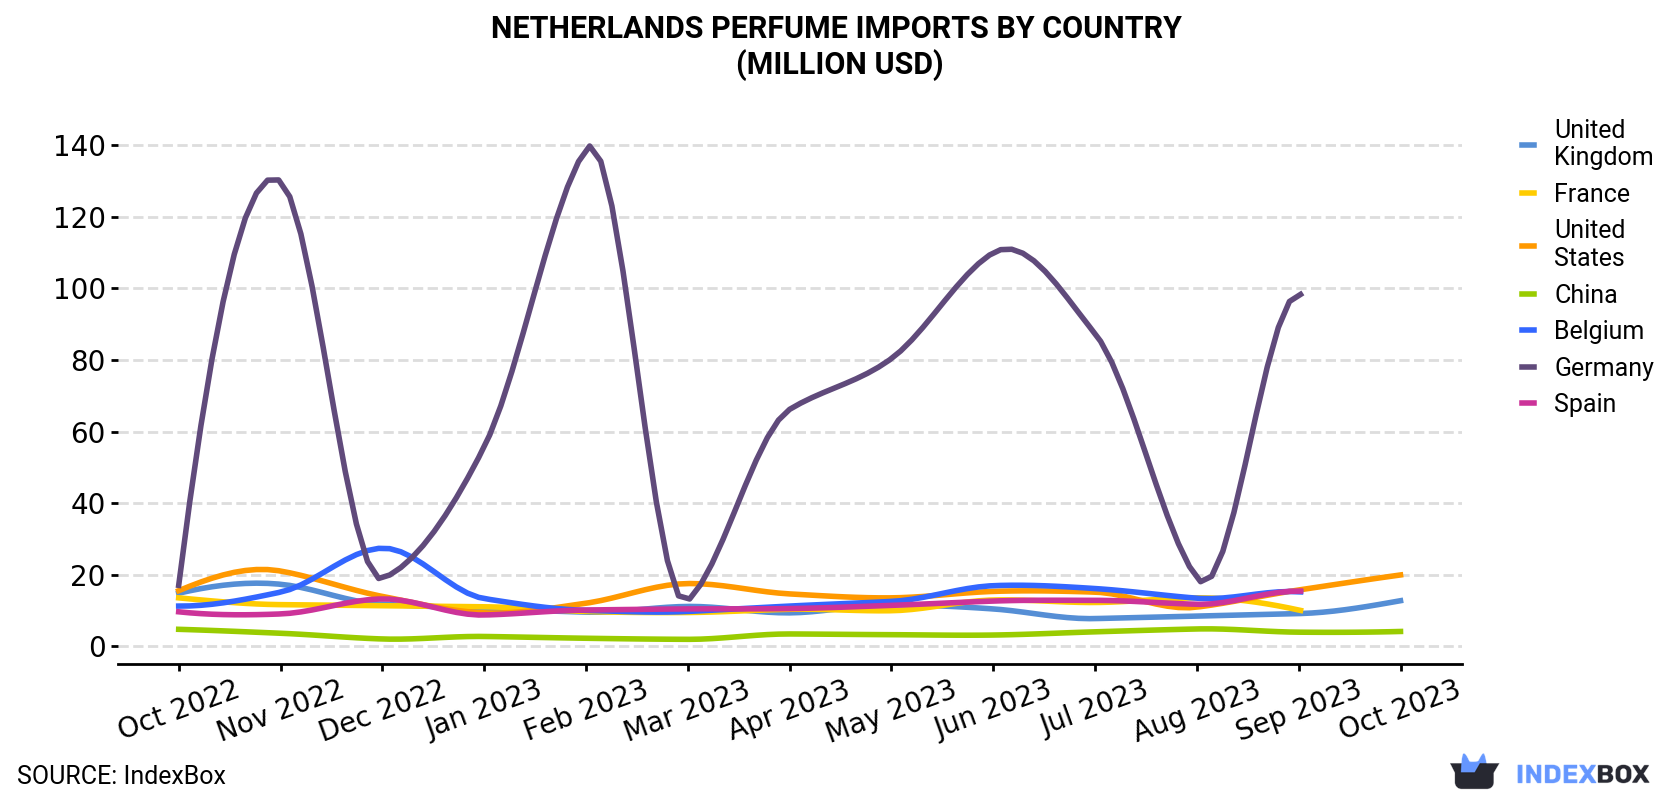 Netherlands Perfume Imports By Country (Million USD)